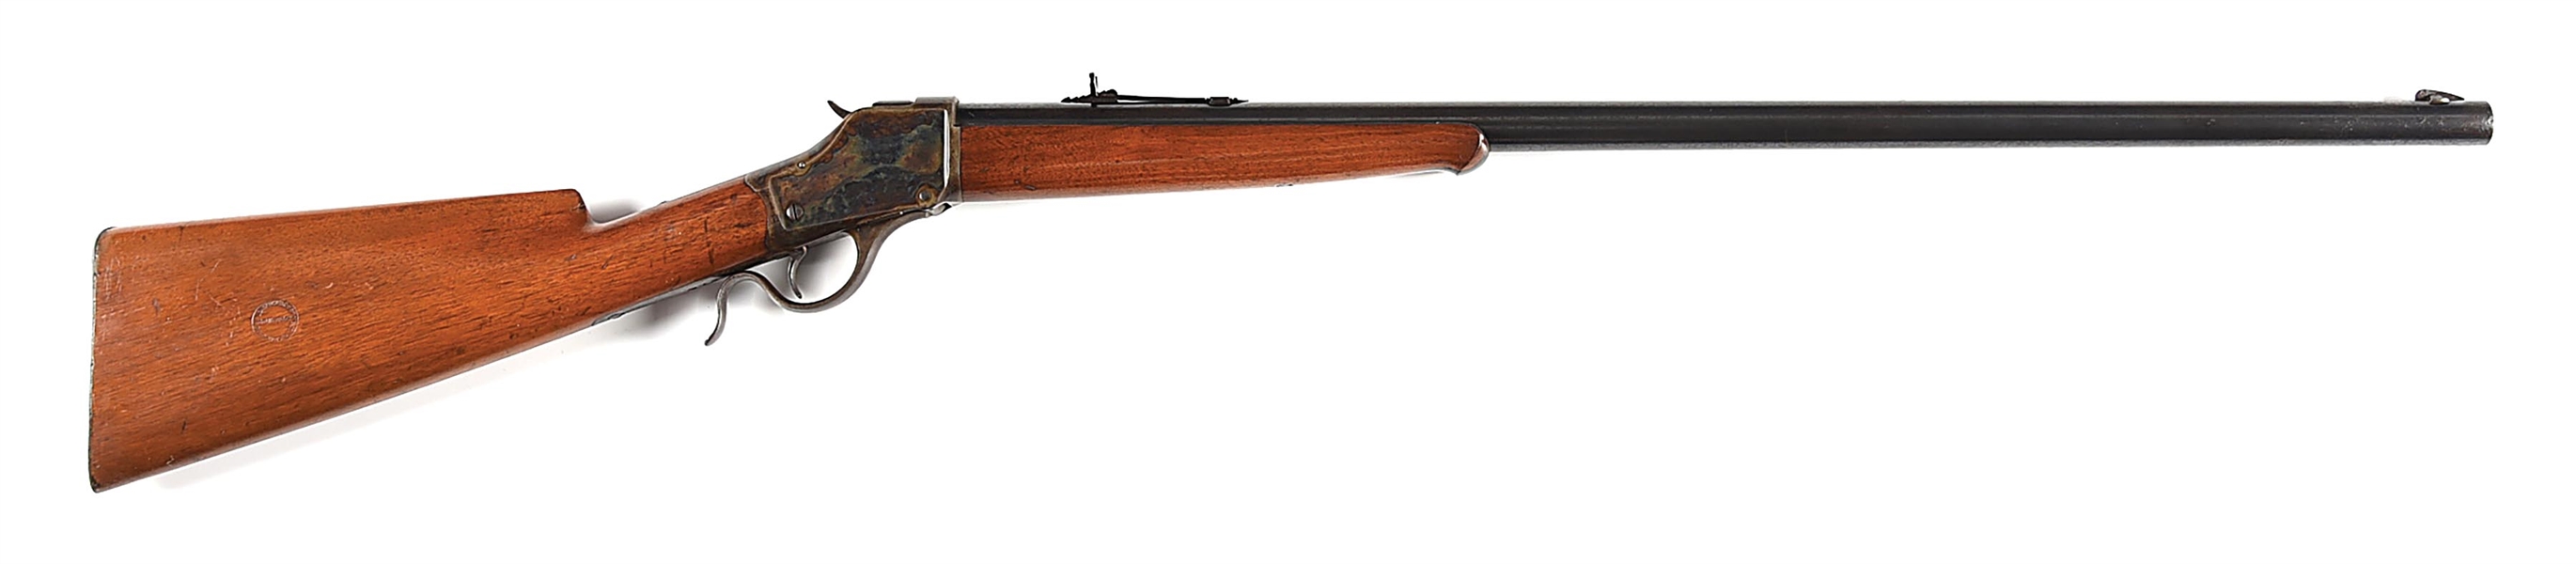 (A) FINE KERR LONDON ARMOURY MARKED WINCHESTER MODEL 1885 HIGH WALL SINGLE SHOT RIFLE IN .40 EXPRESS.